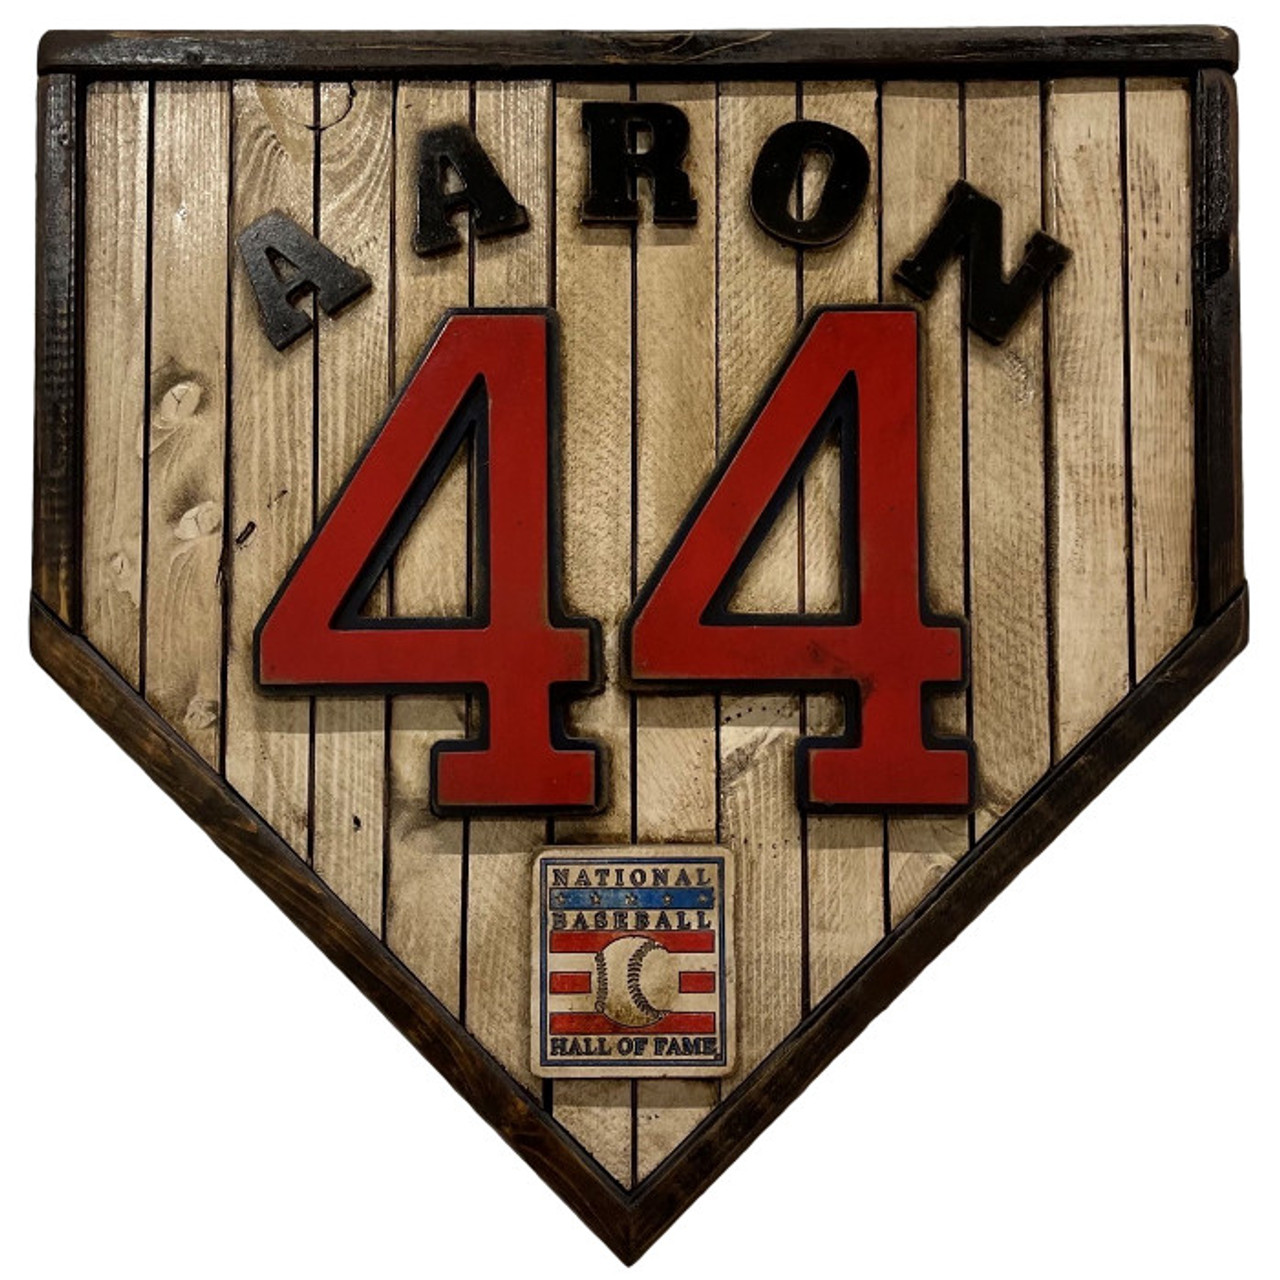 Hank Aaron Hall of Fame Vintage Distressed Wood 18.5 Inch Legacy Home Plate  Ltd Ed of 250